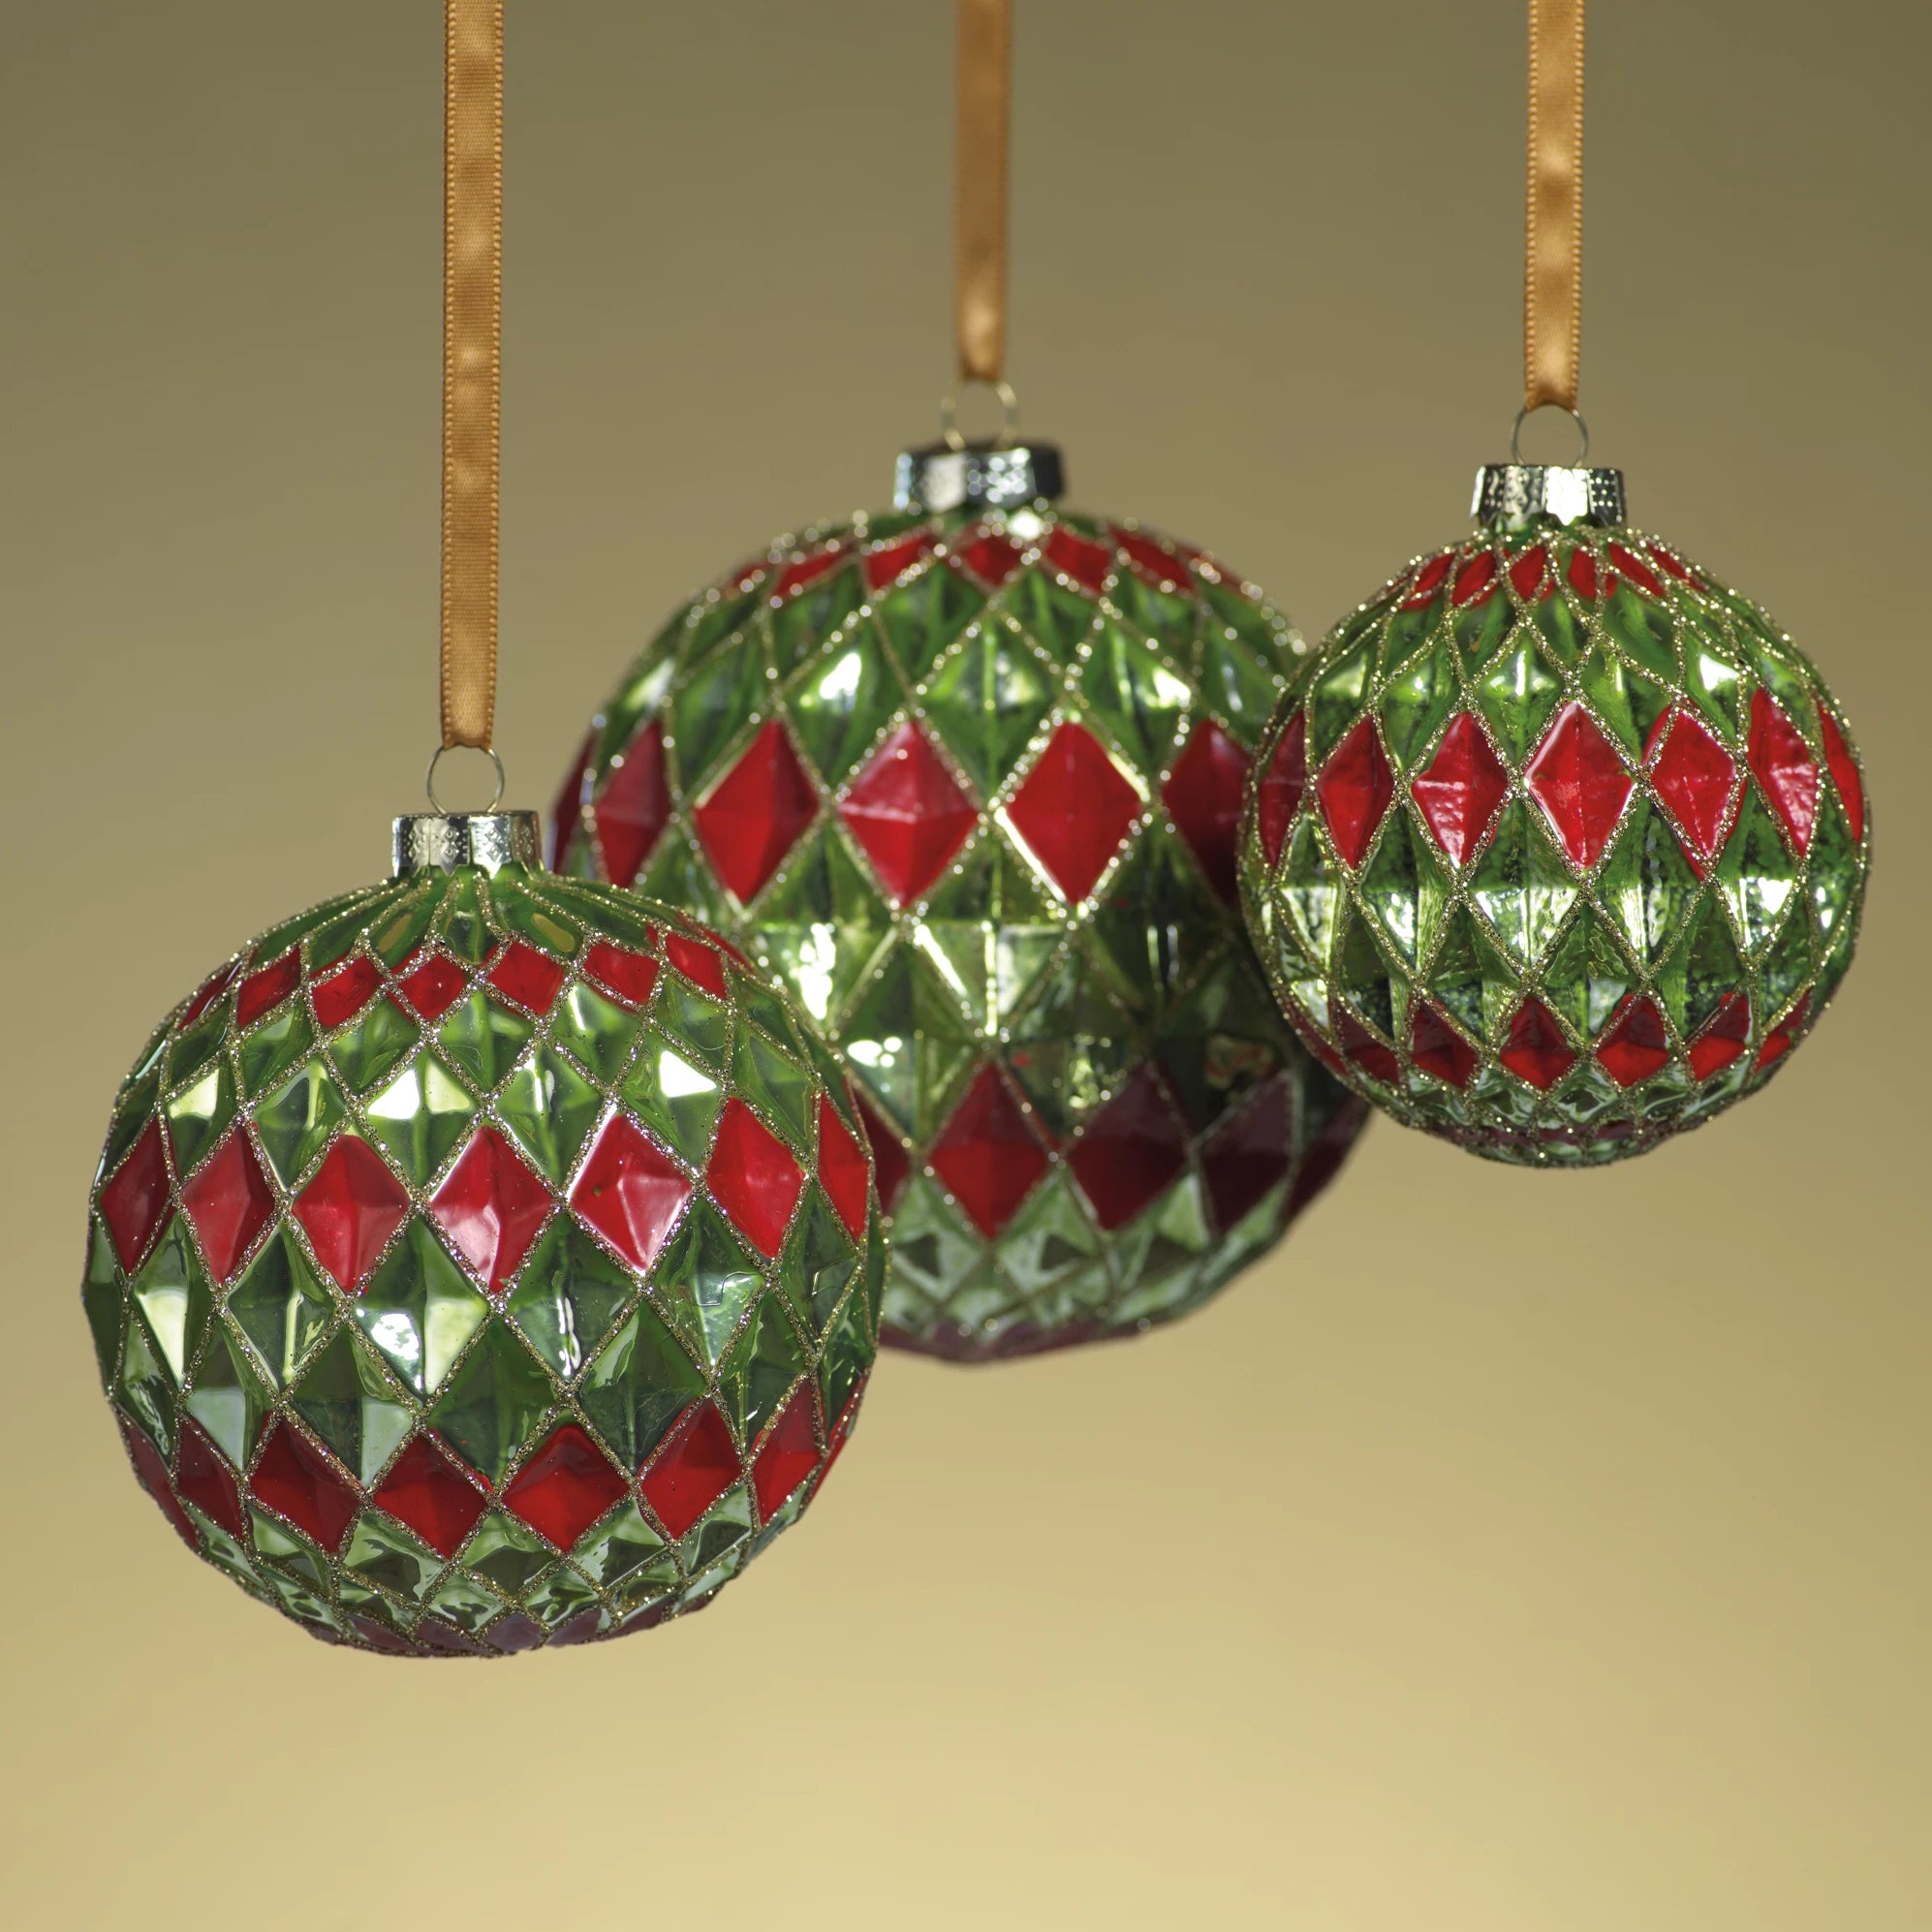 Carnival Ball Ornament - Green & Red - CARLYLE AVENUE